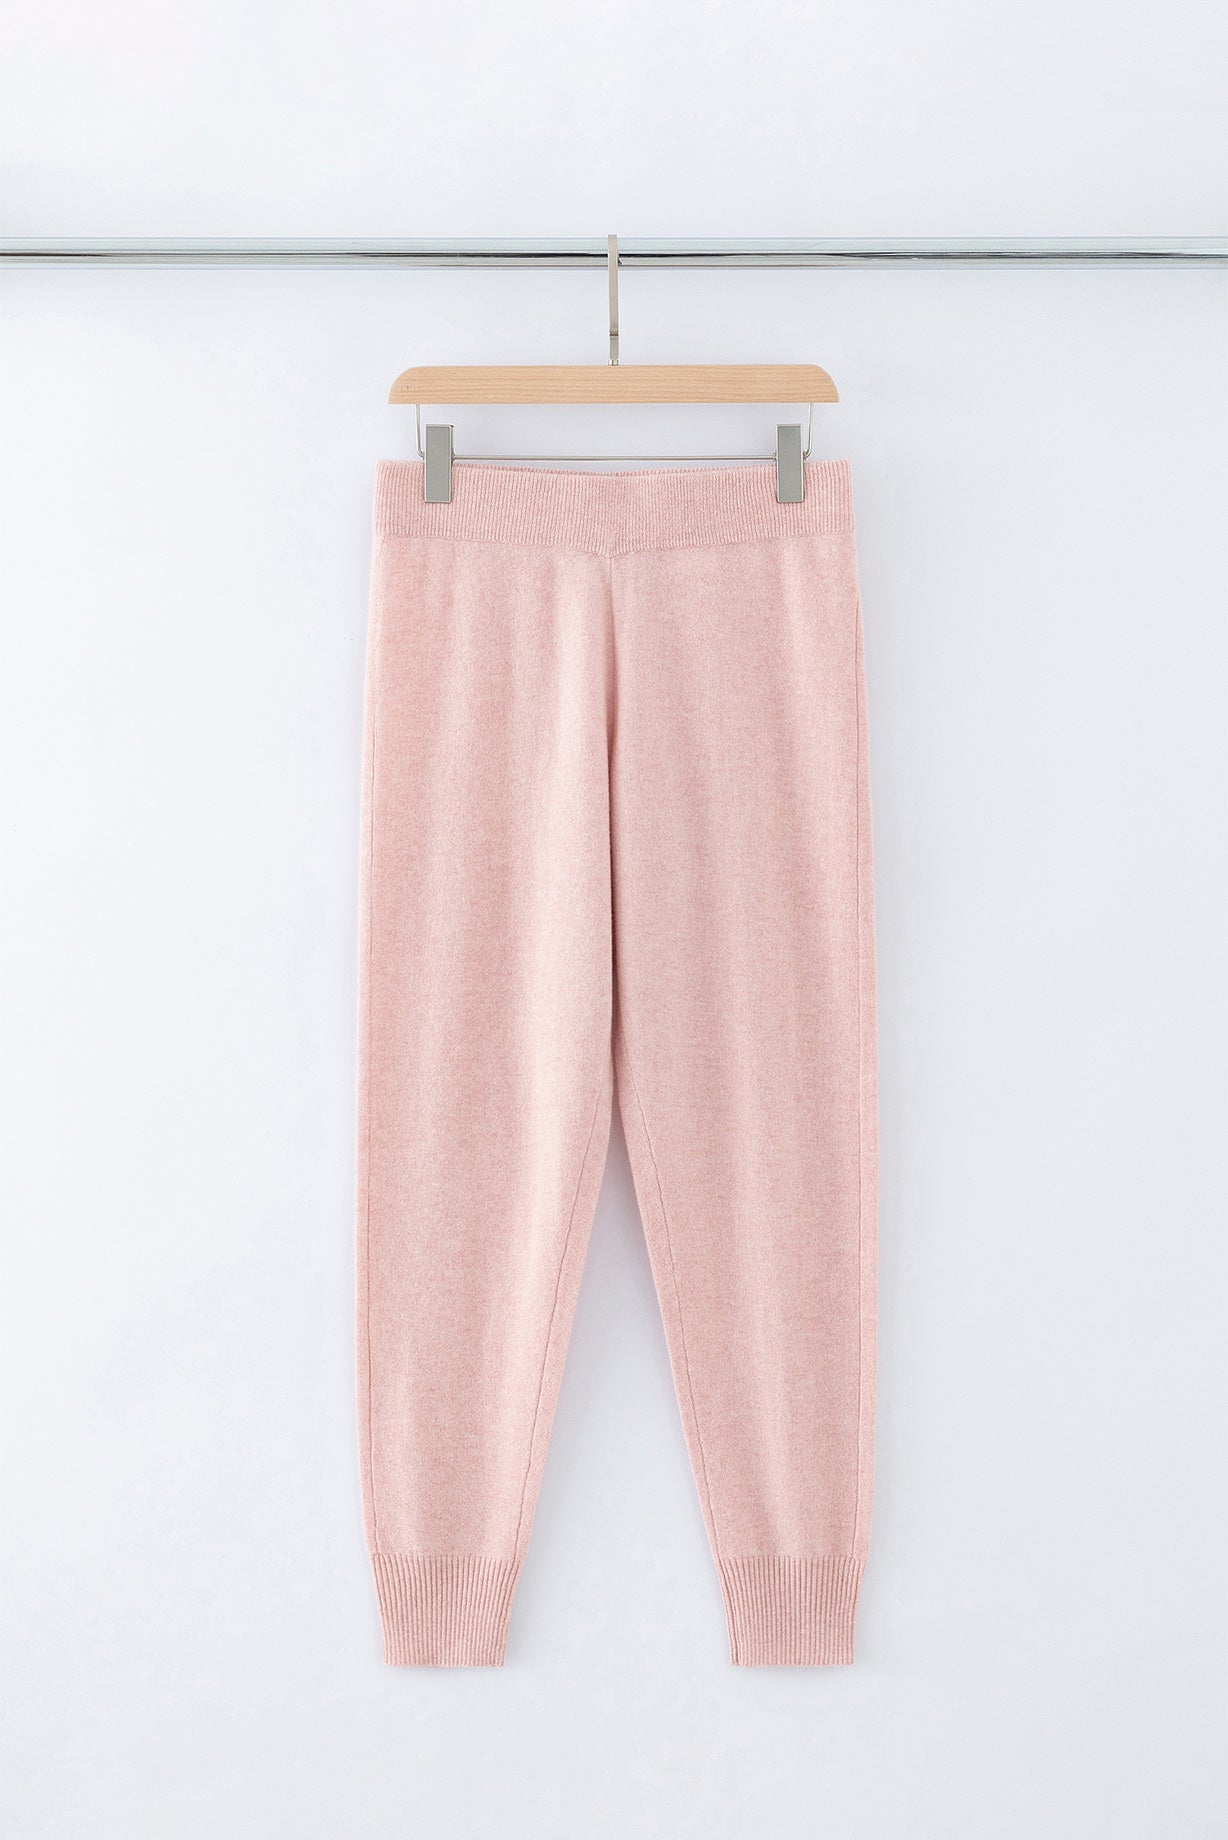 N.46 100% CASHMERE CLASSIC TRACK PANT - ROSE - Only XS, S, M Left